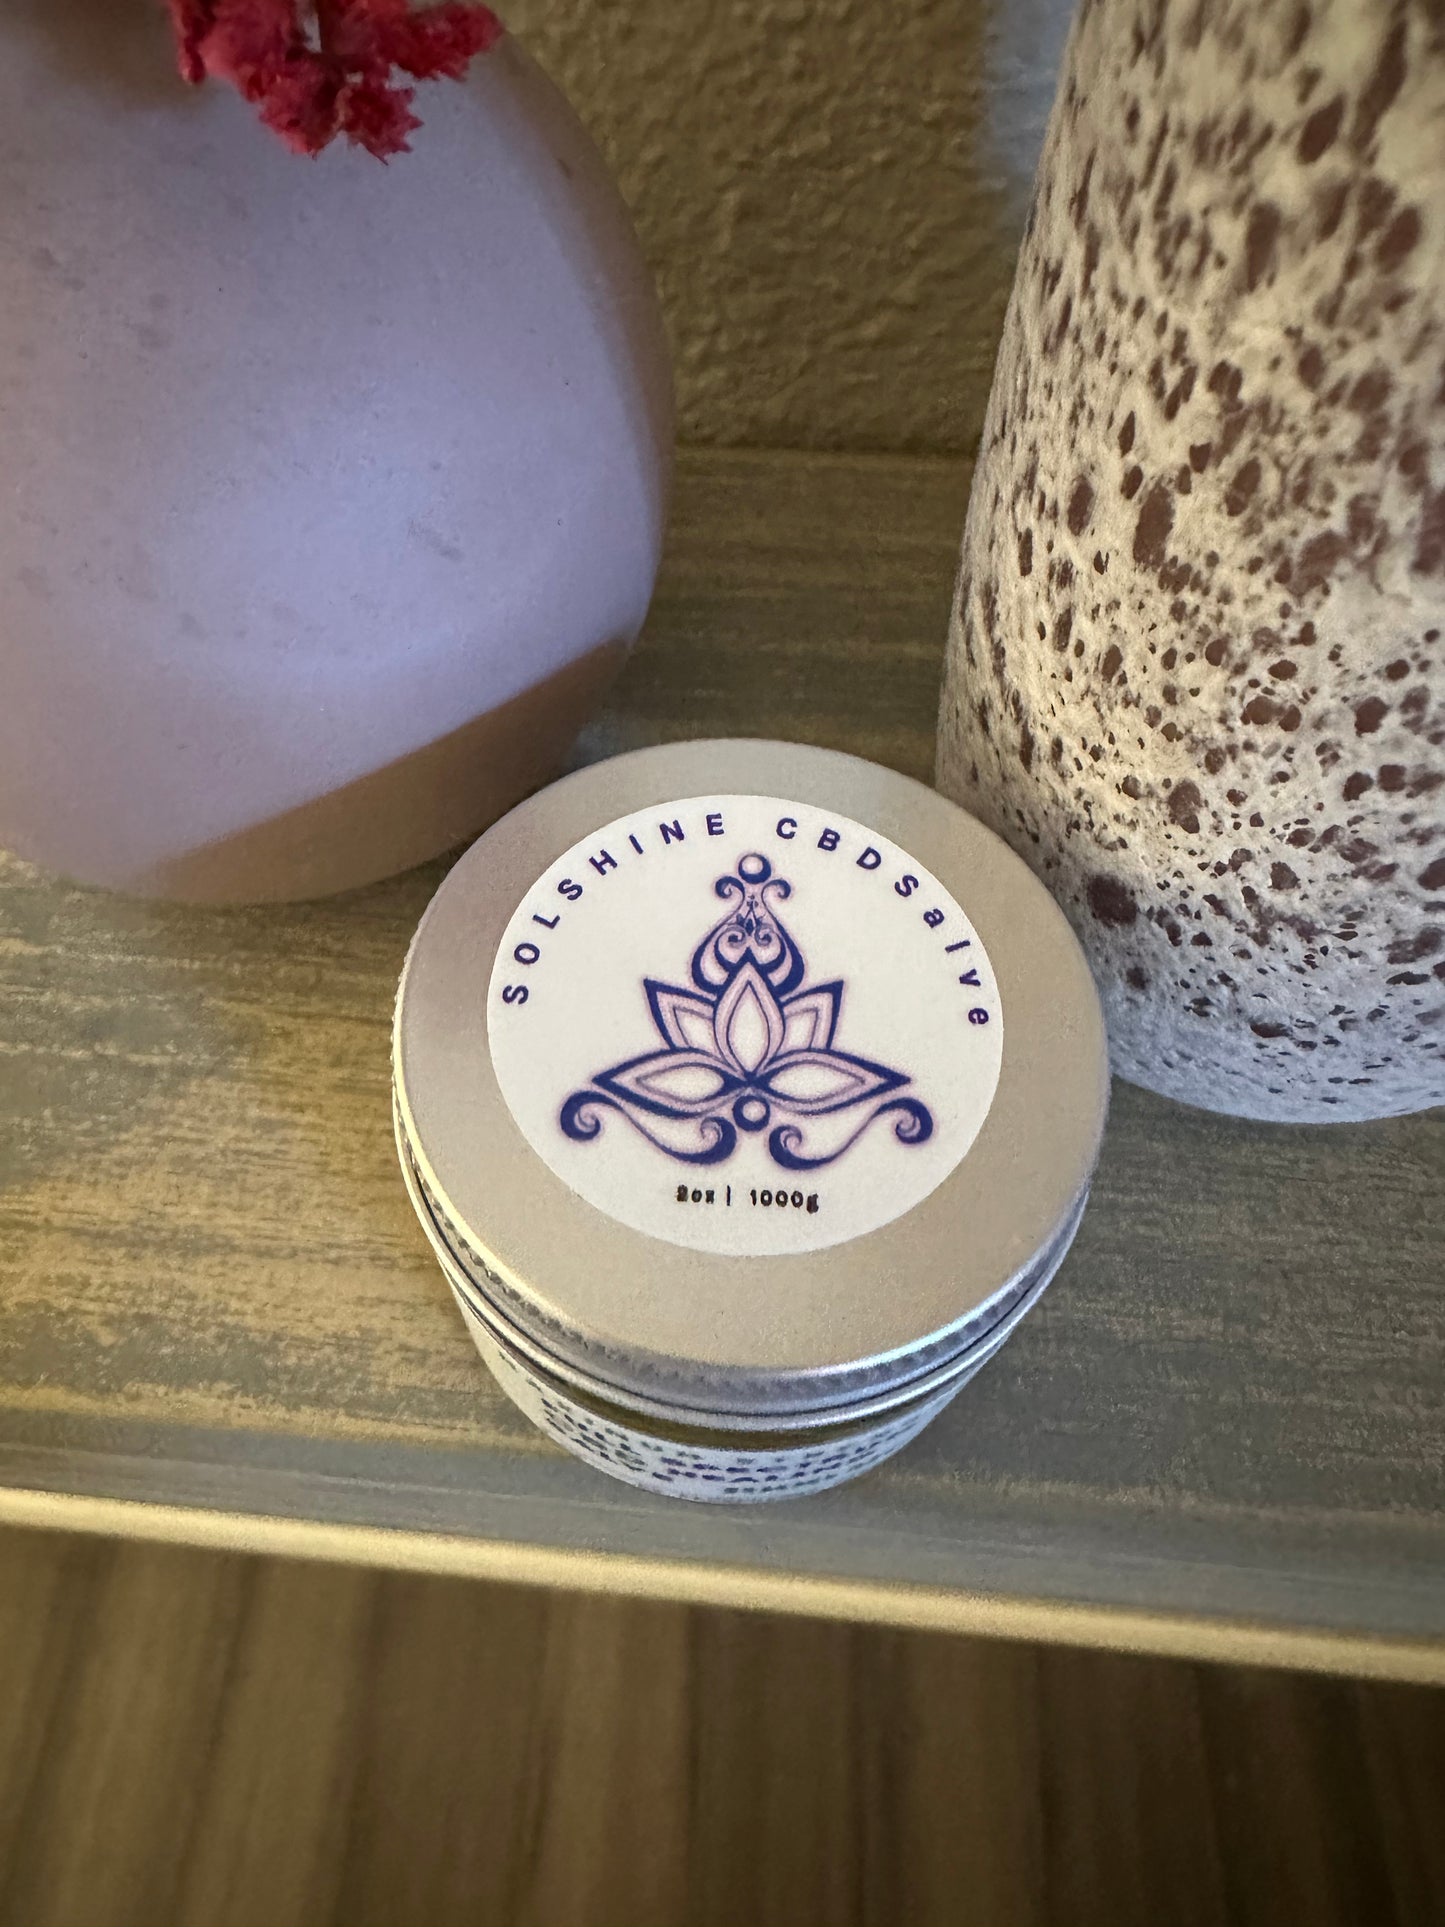 Icy Cold CBD Salve with Arnica Oil